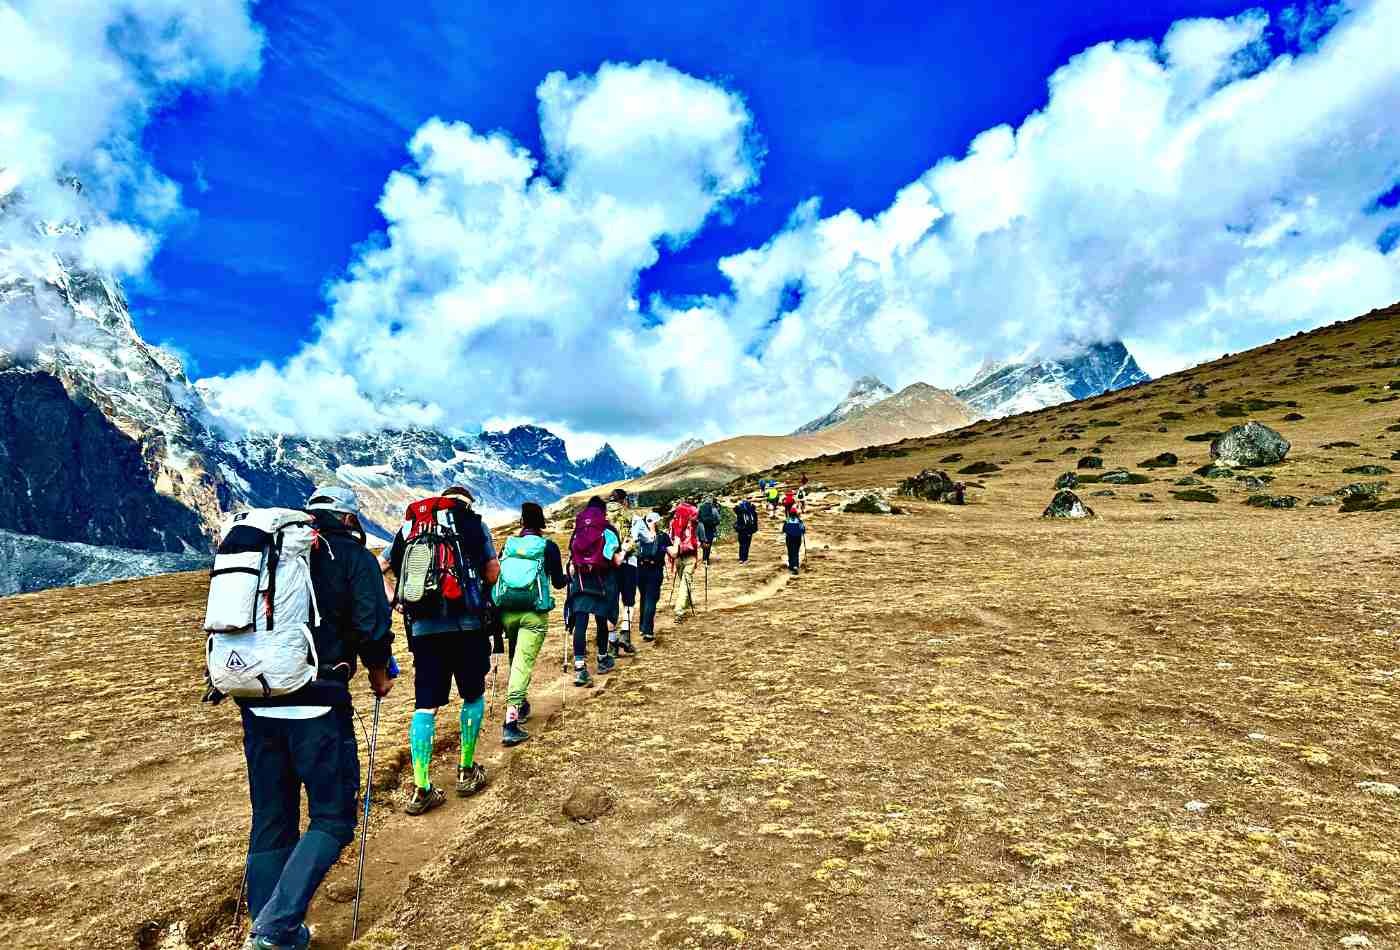 Group of trekkers standing in a queue, making their way to Mount Everest Base Camp, surrounded by the majestic Himalayan peaks.